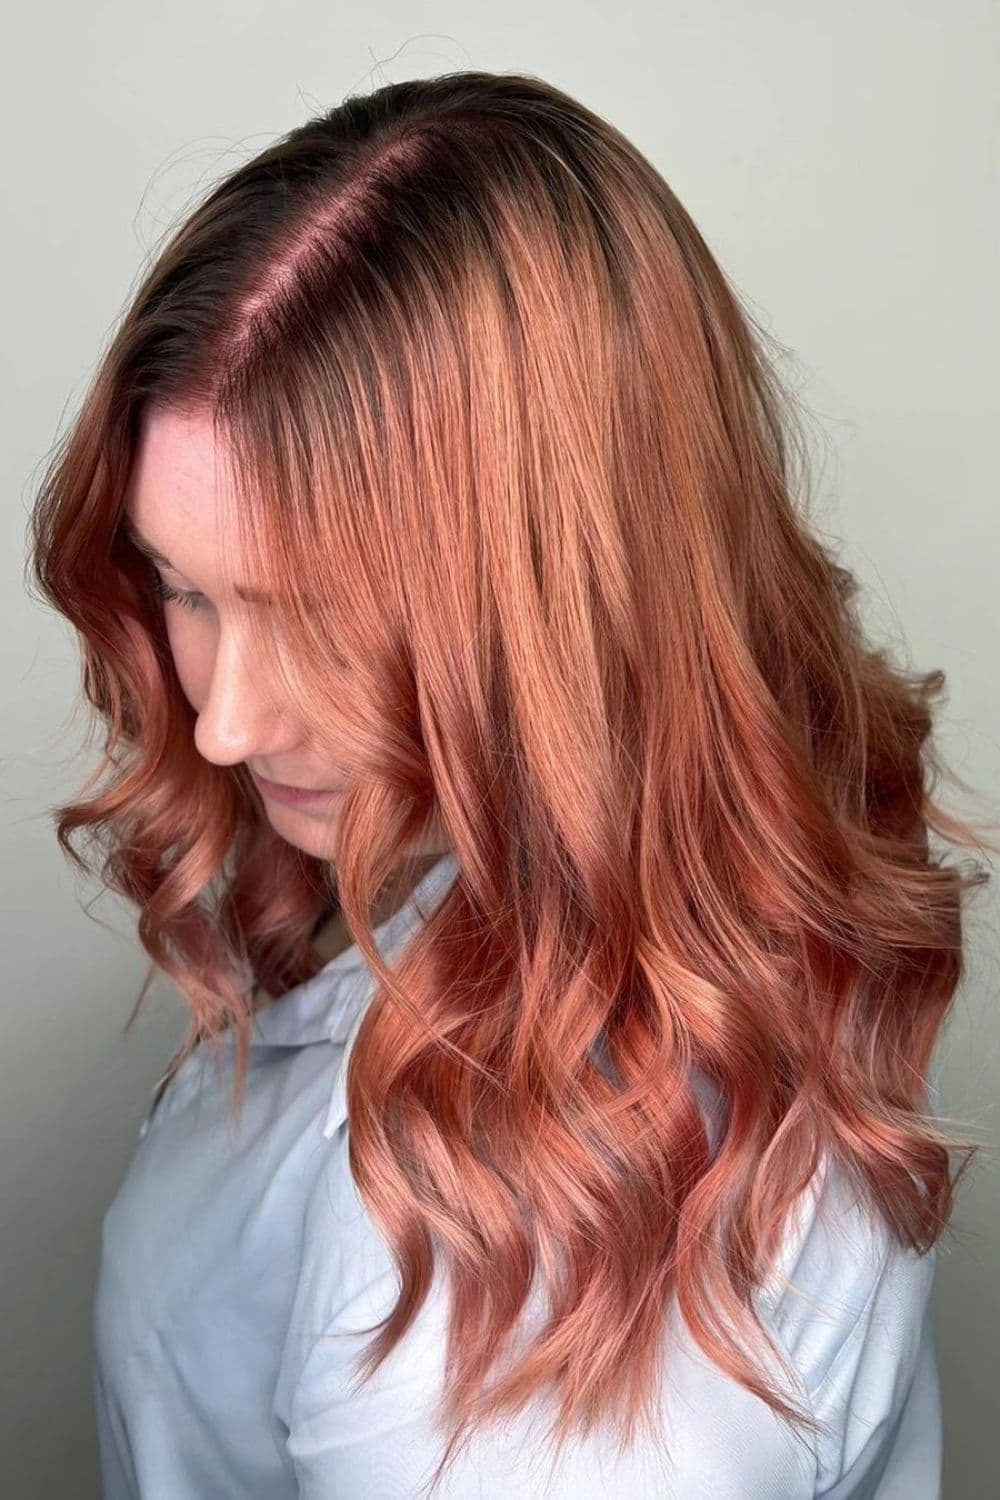 A woman with medium-length rose gold hair with curls.